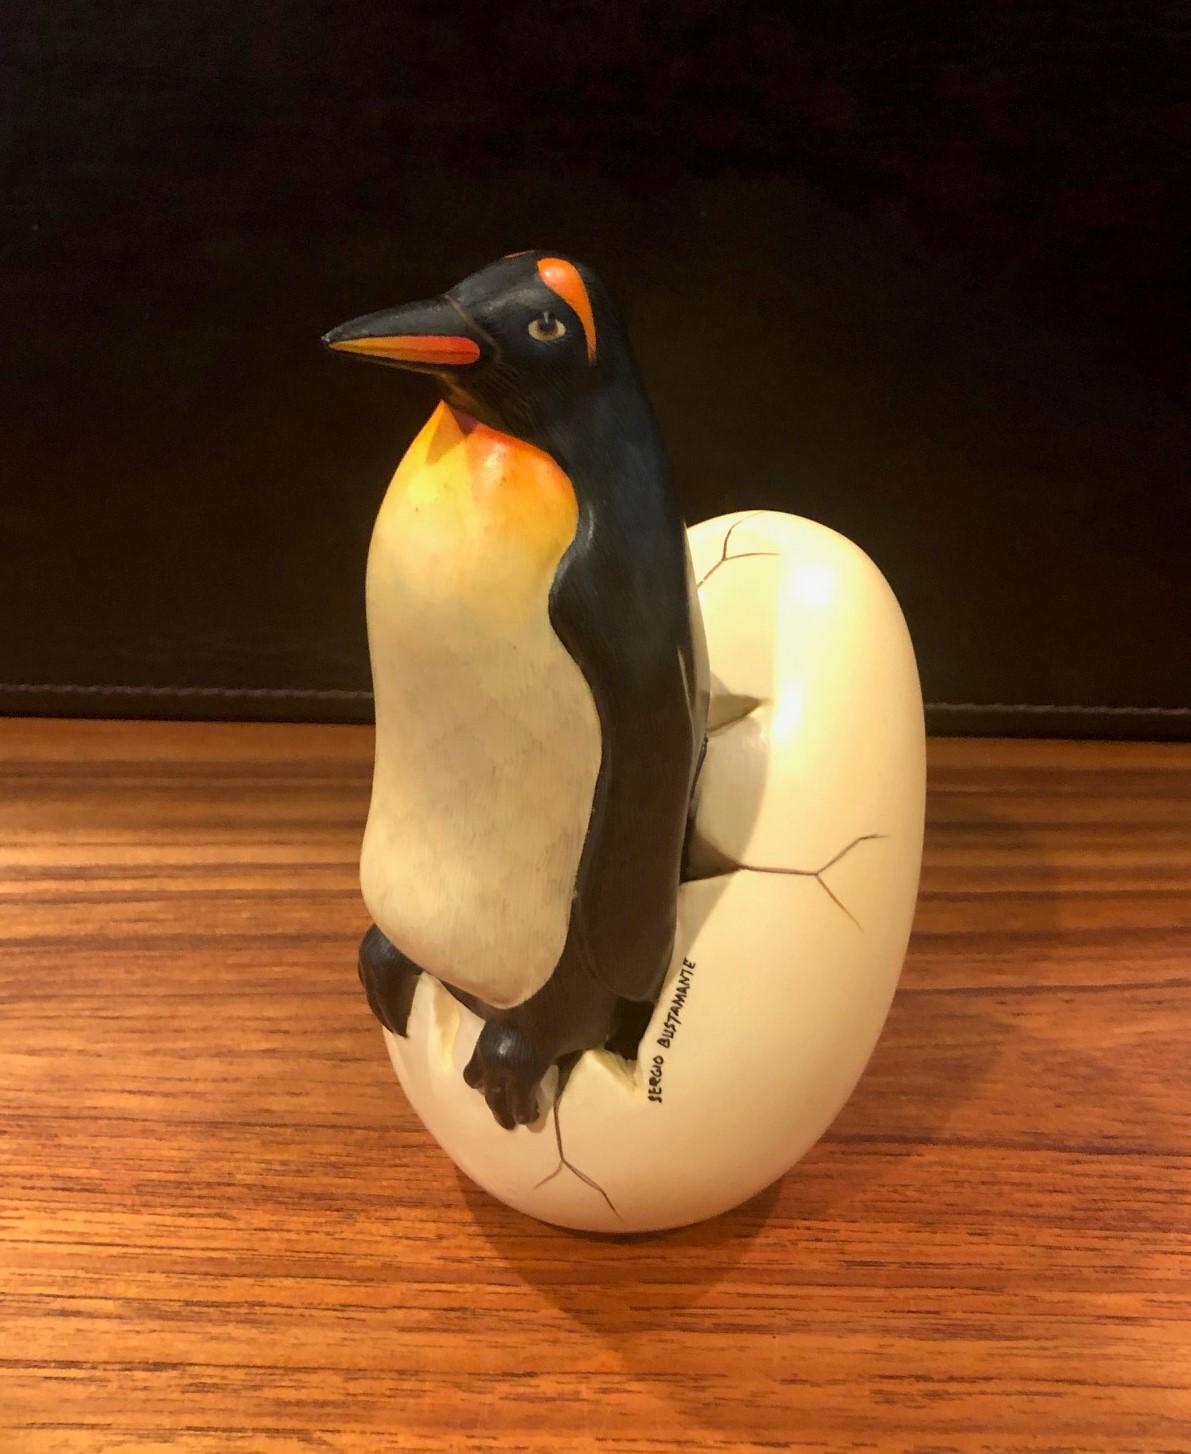 Hand-Painted Whimsical Ceramic Hatching Penguin from Egg Sculpture by Sergio Bustamante